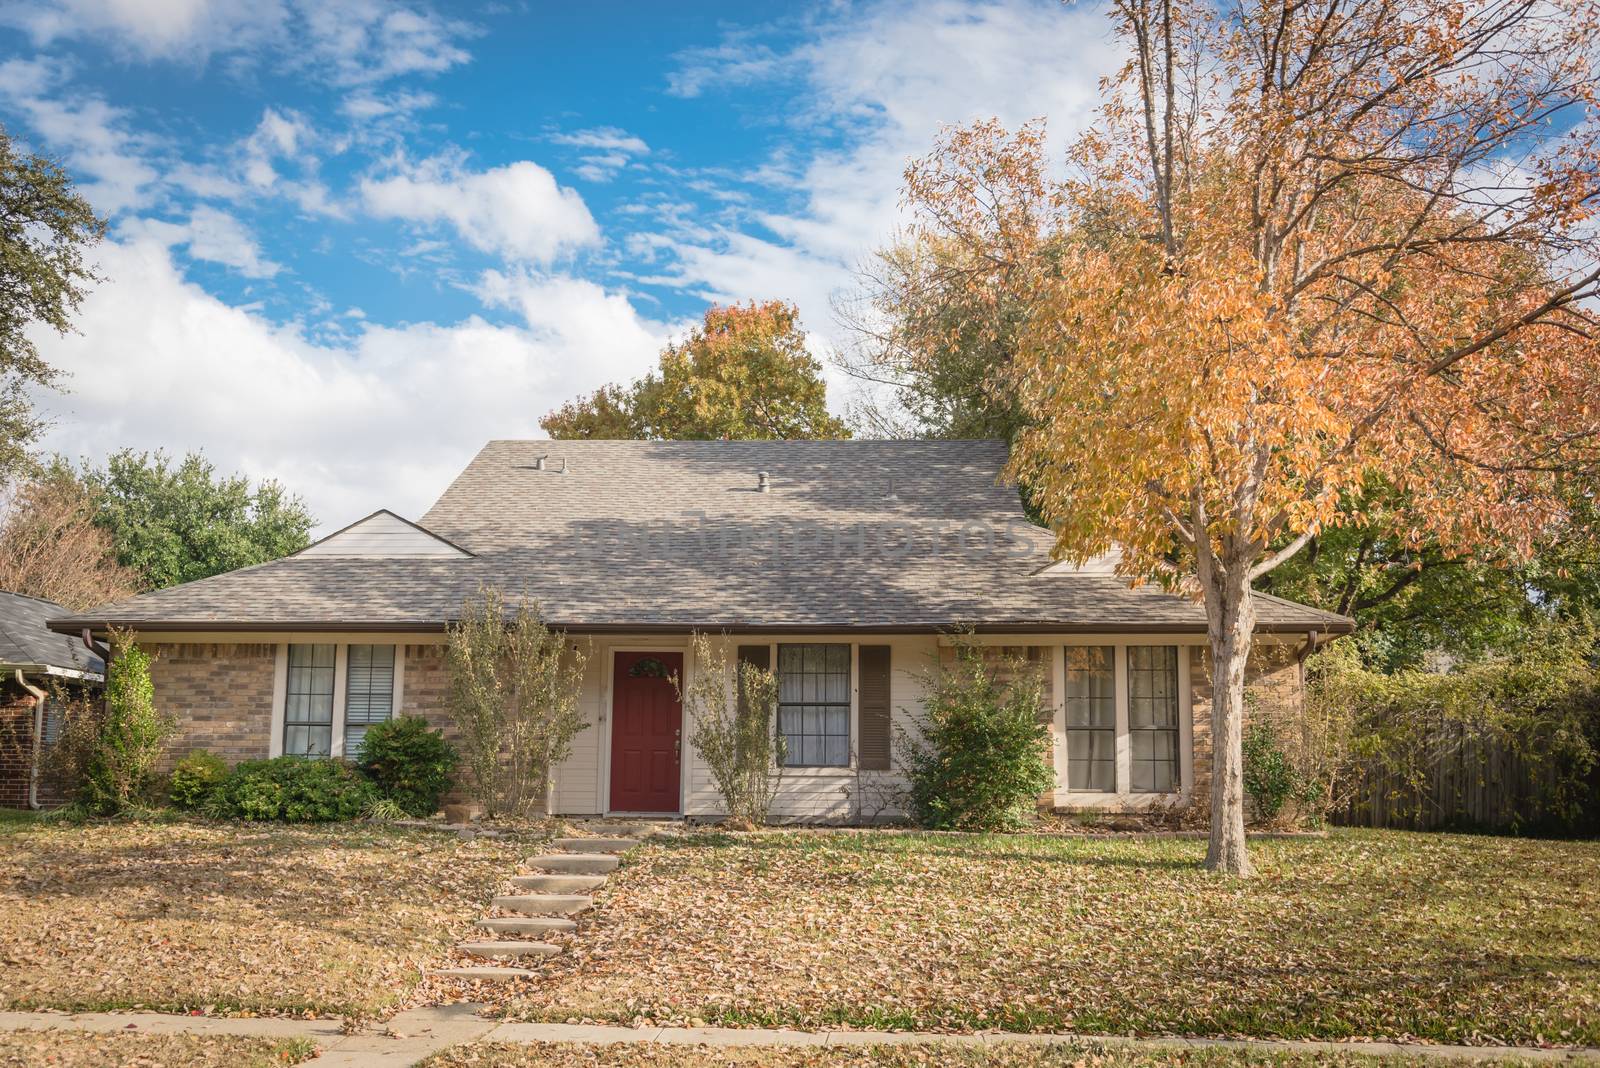 Typical front yard of single family houses near Dallas, Texas in fall season with colorful autumn leaves. Elevated sidewalk of one story house under mature trees with cloud blue sky